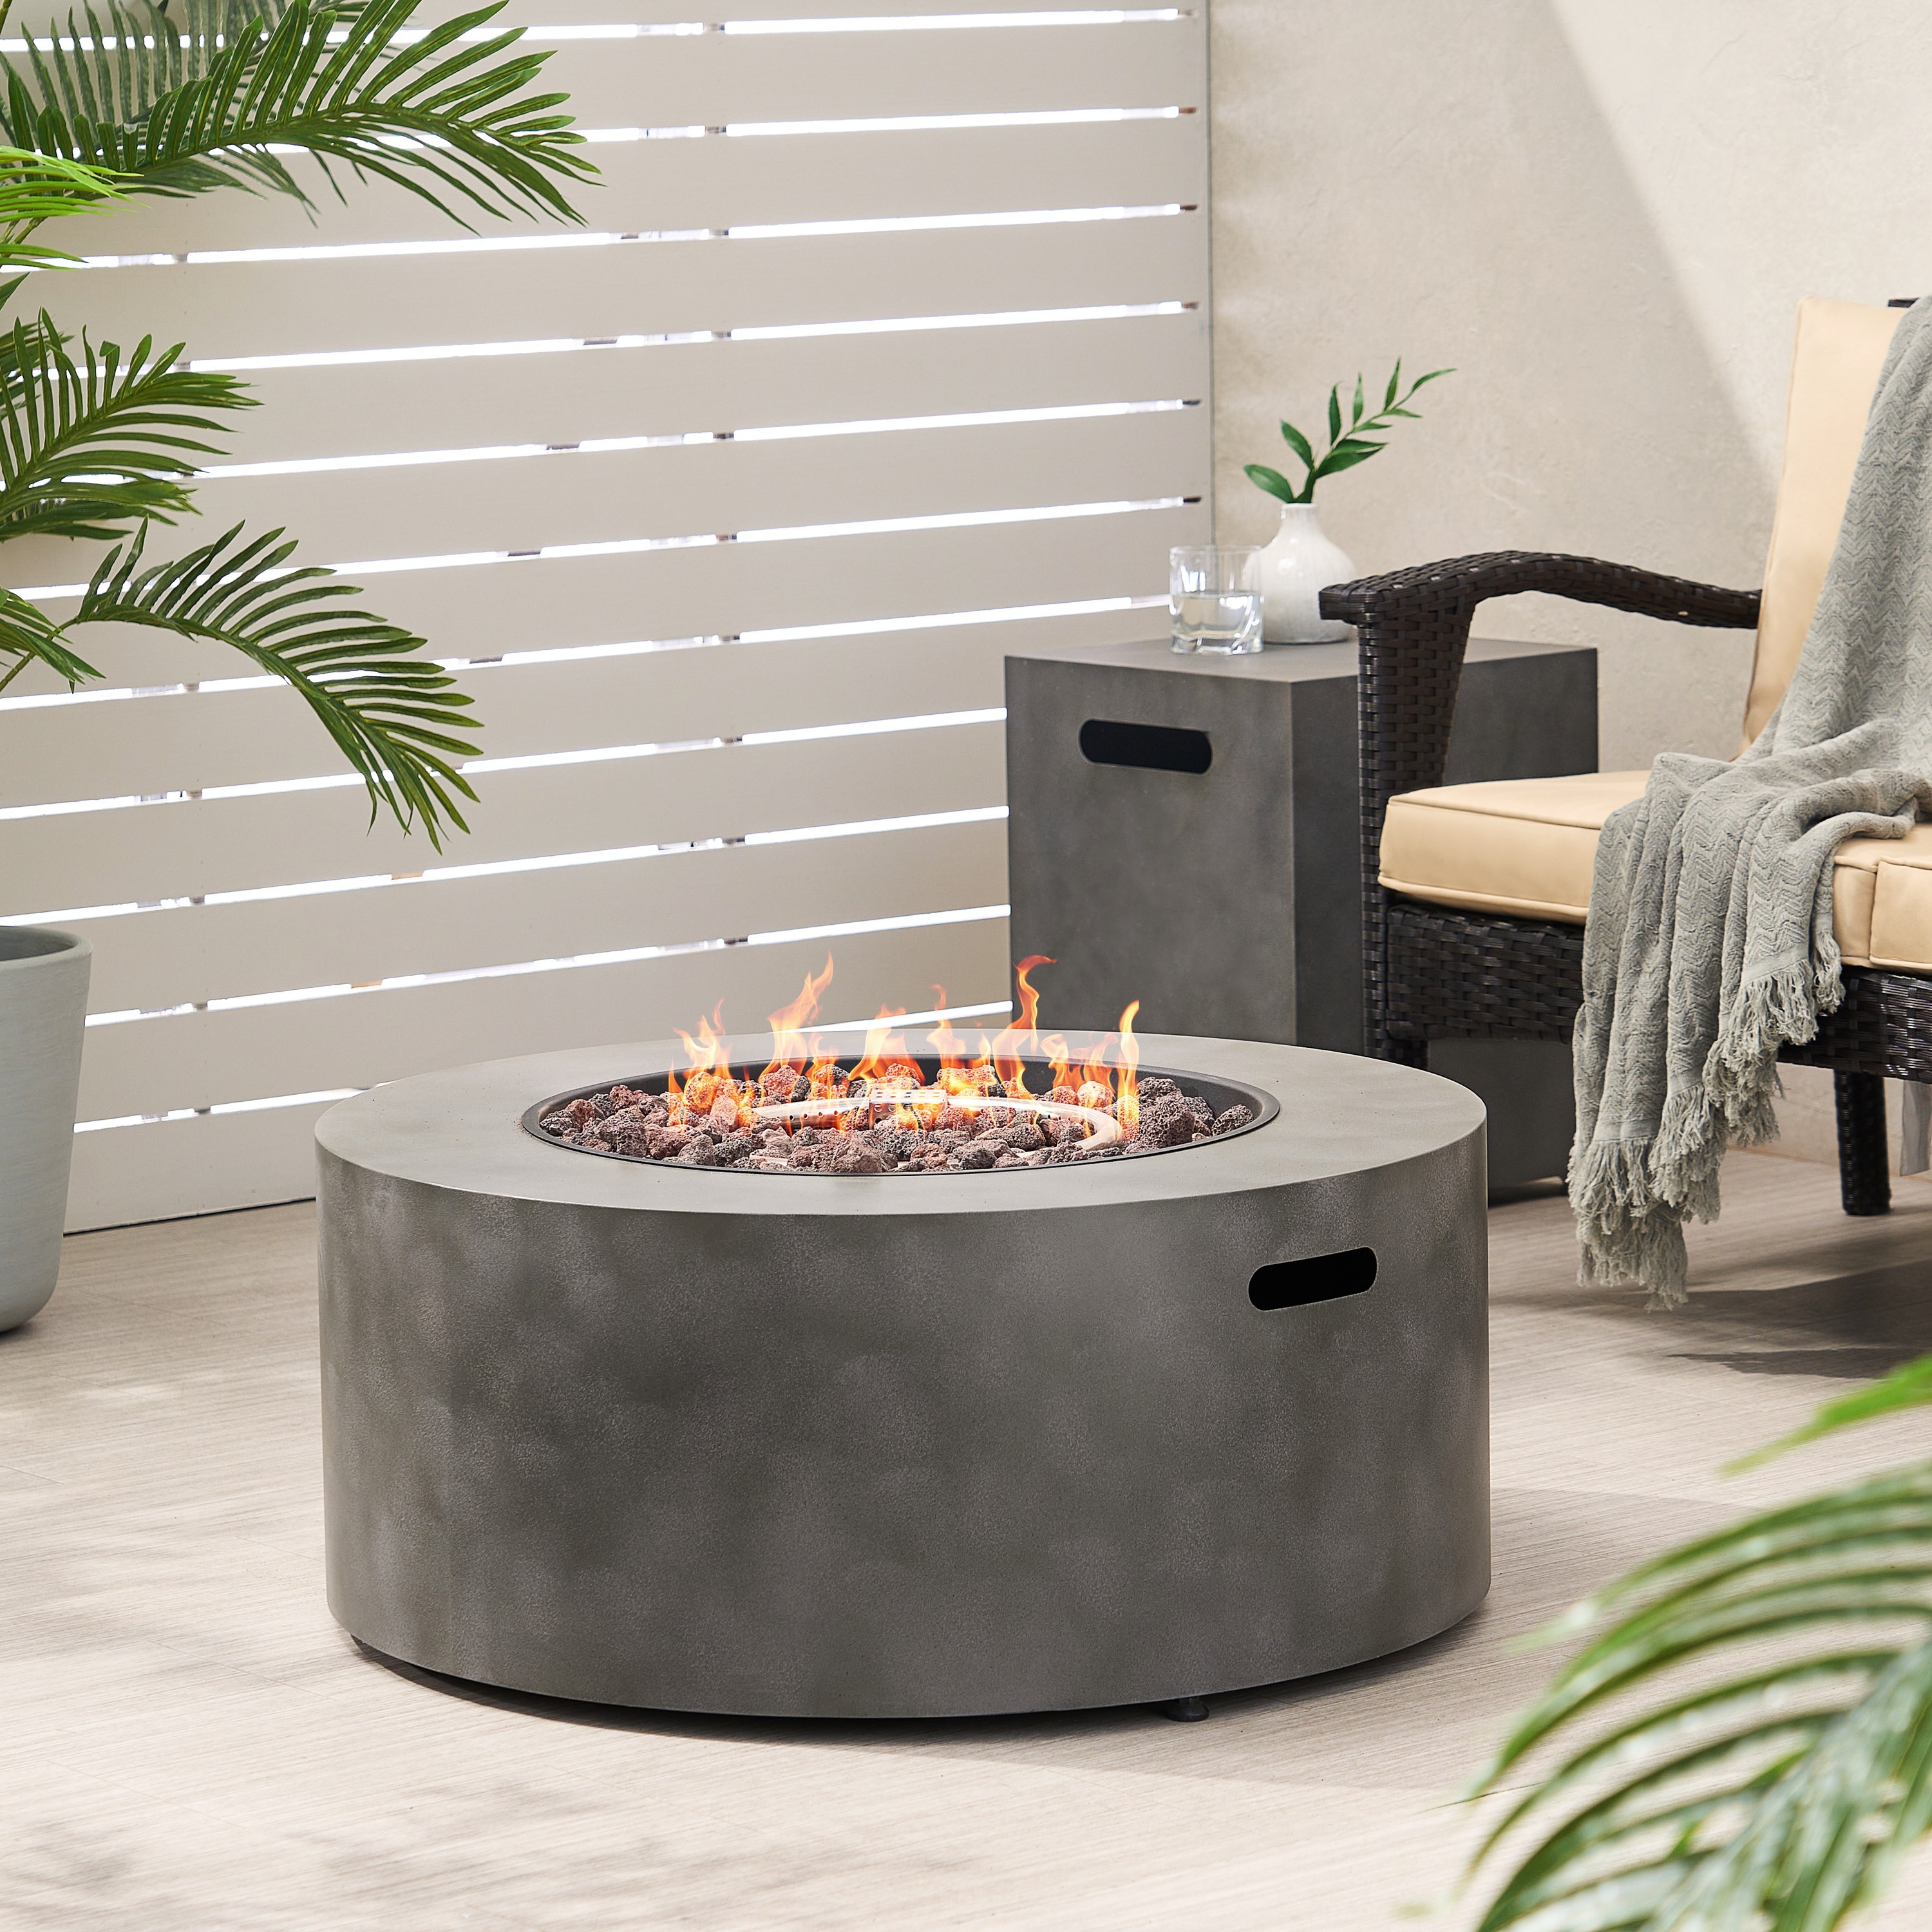 Christopher Knight Home Hobbs Outdoor Iron Circular Fire Pit